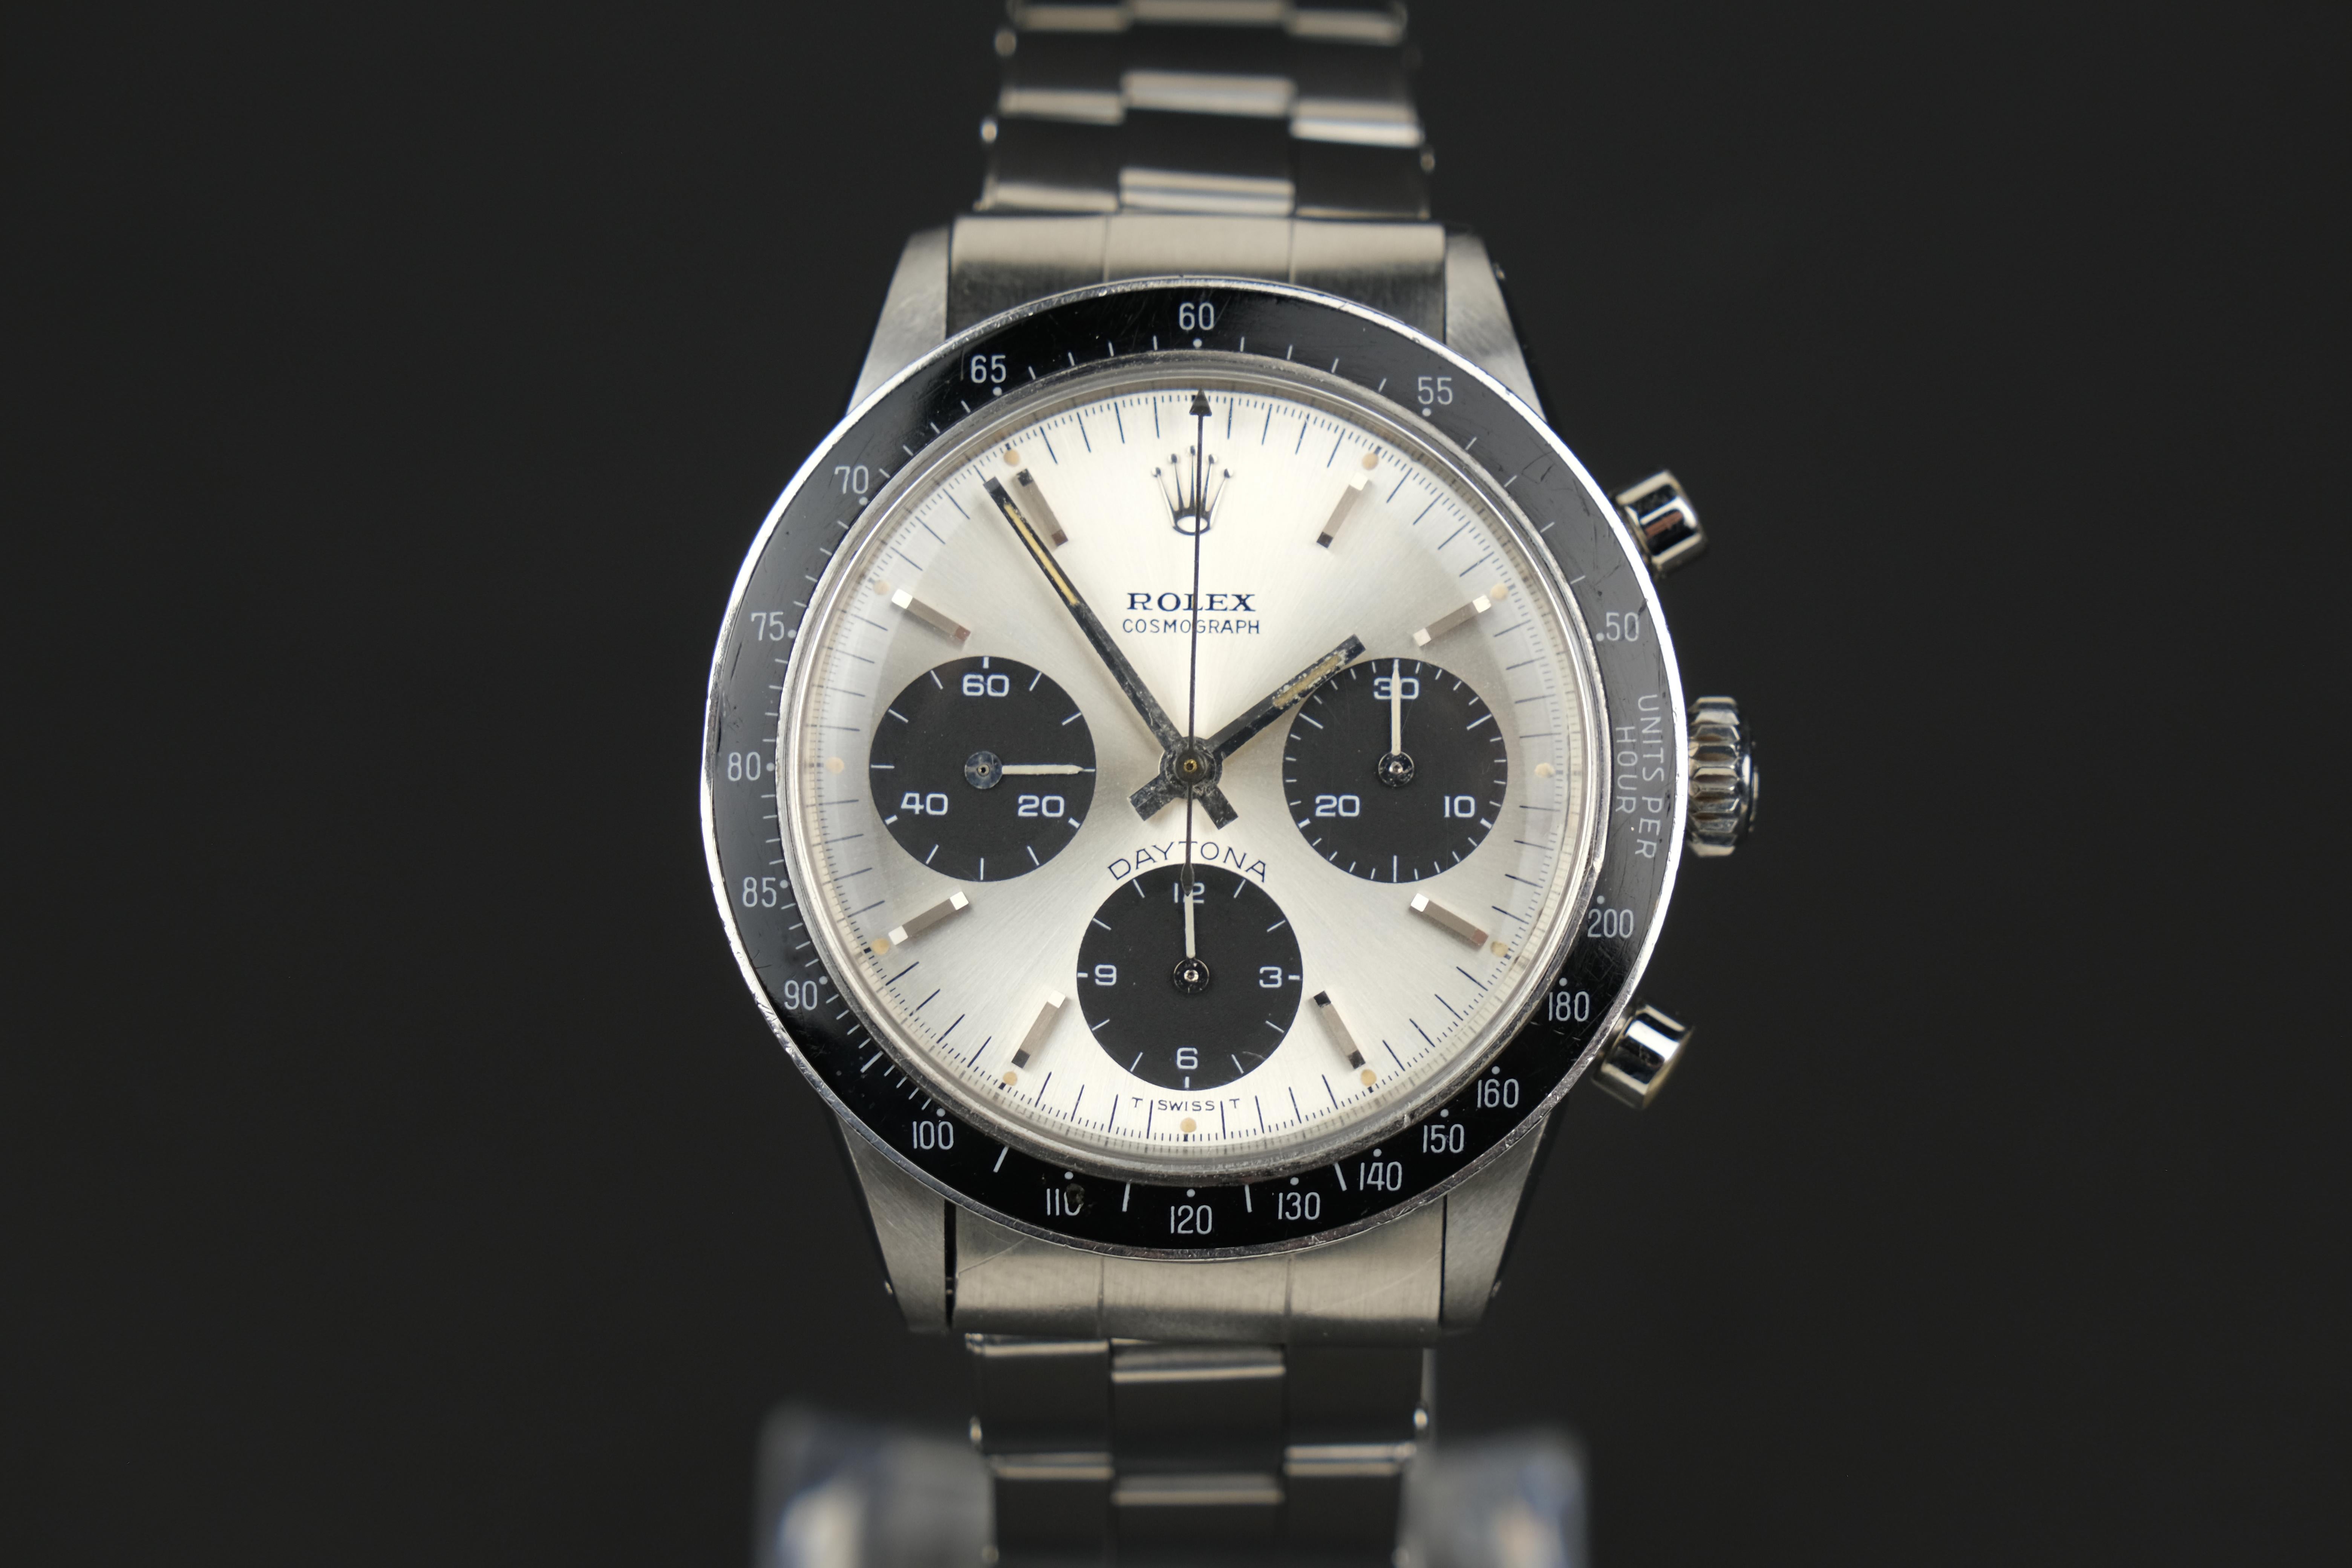 Rolex Daytona 6241, the Paul Newman.

Well, here is the Holy Grail of watch collecting.

Paul Newman’s original sold for the obscene price of 17 million plus a couple of years ago.

It was also pretty beaten up and in an interview I saw of a